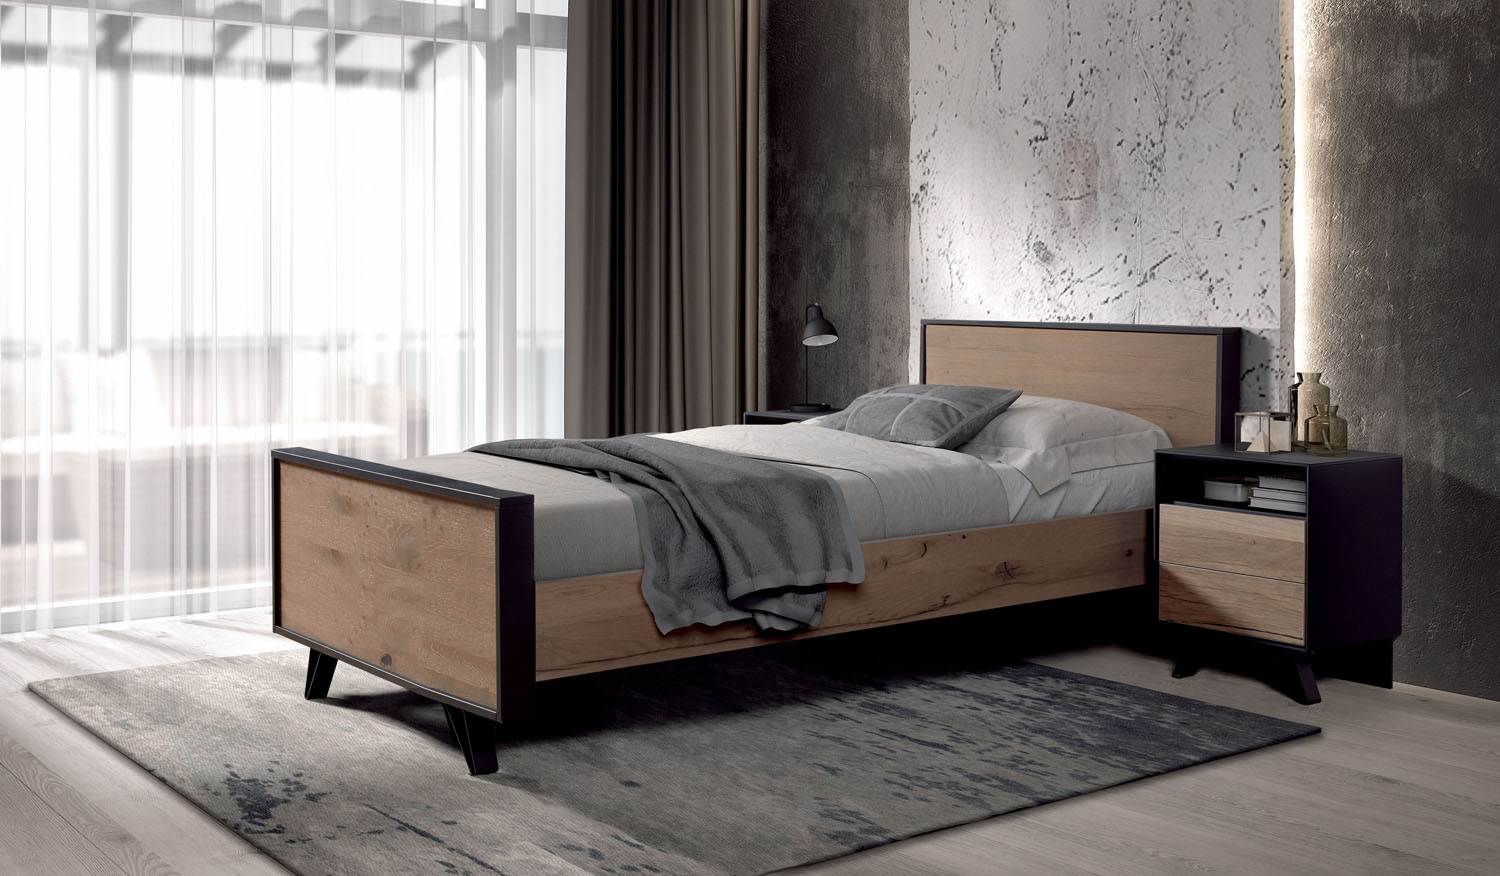 Sita persoons bed - Collectie